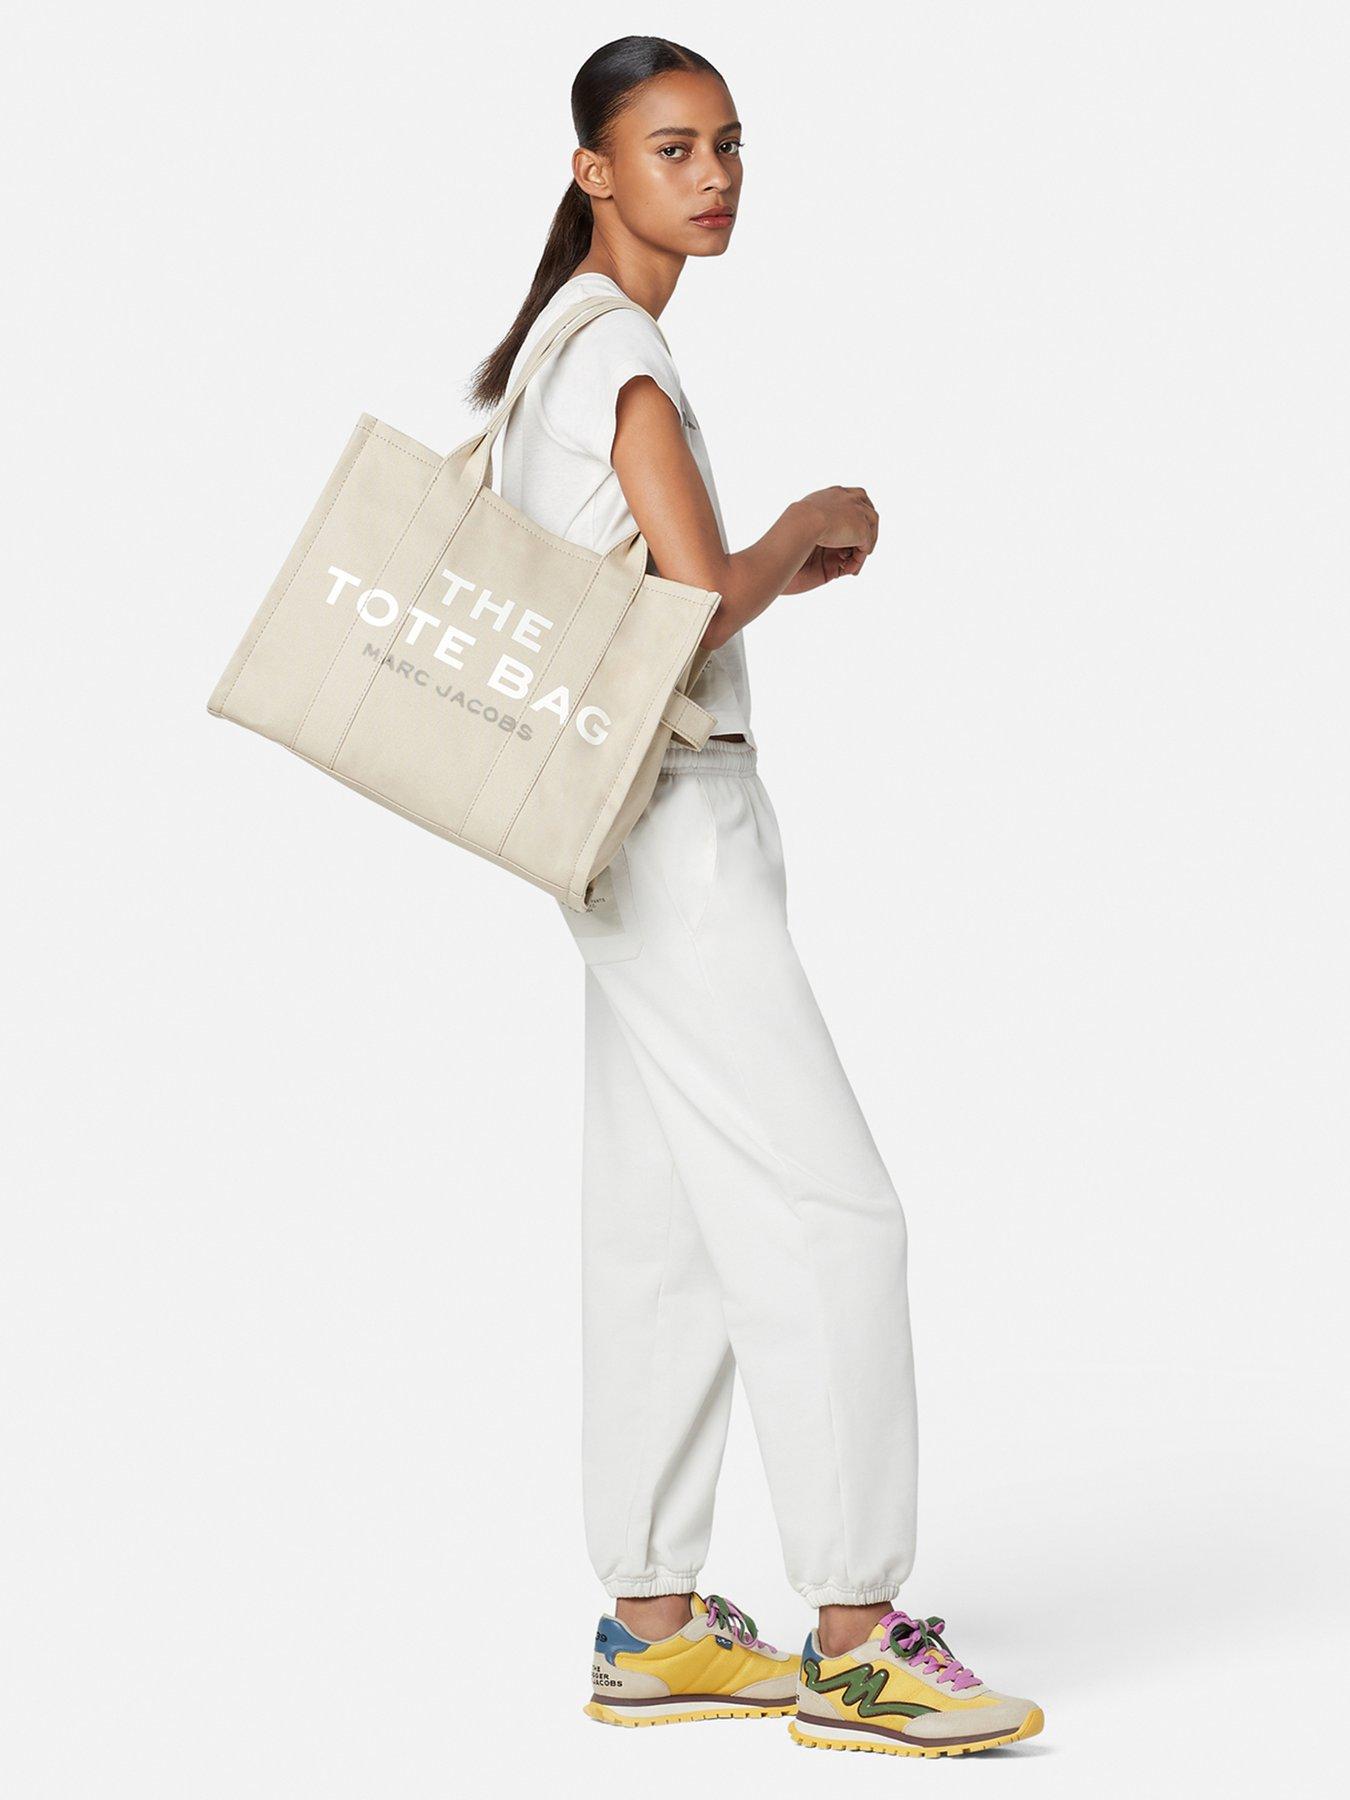 The Large Canvas Tote Bag in Beige - Marc Jacobs